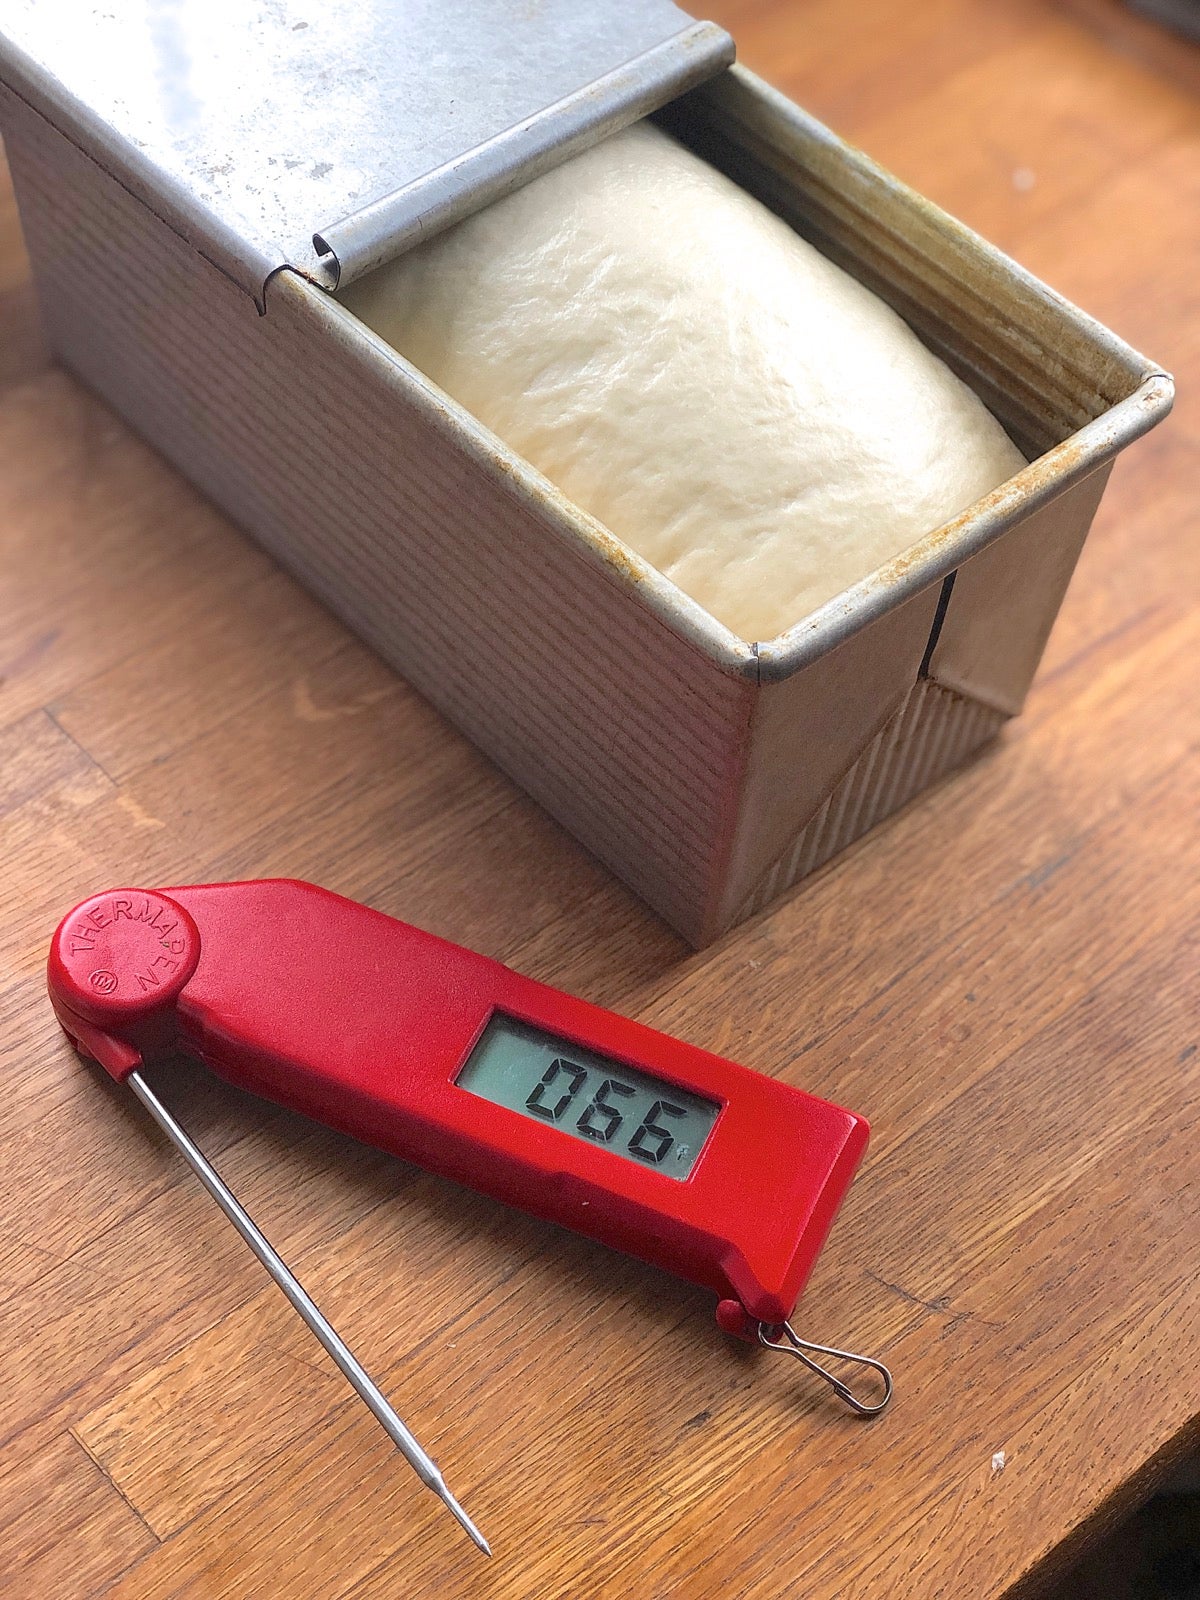 Rising dough in a loaf pan with a thermometer showing air temperature next to the pan.